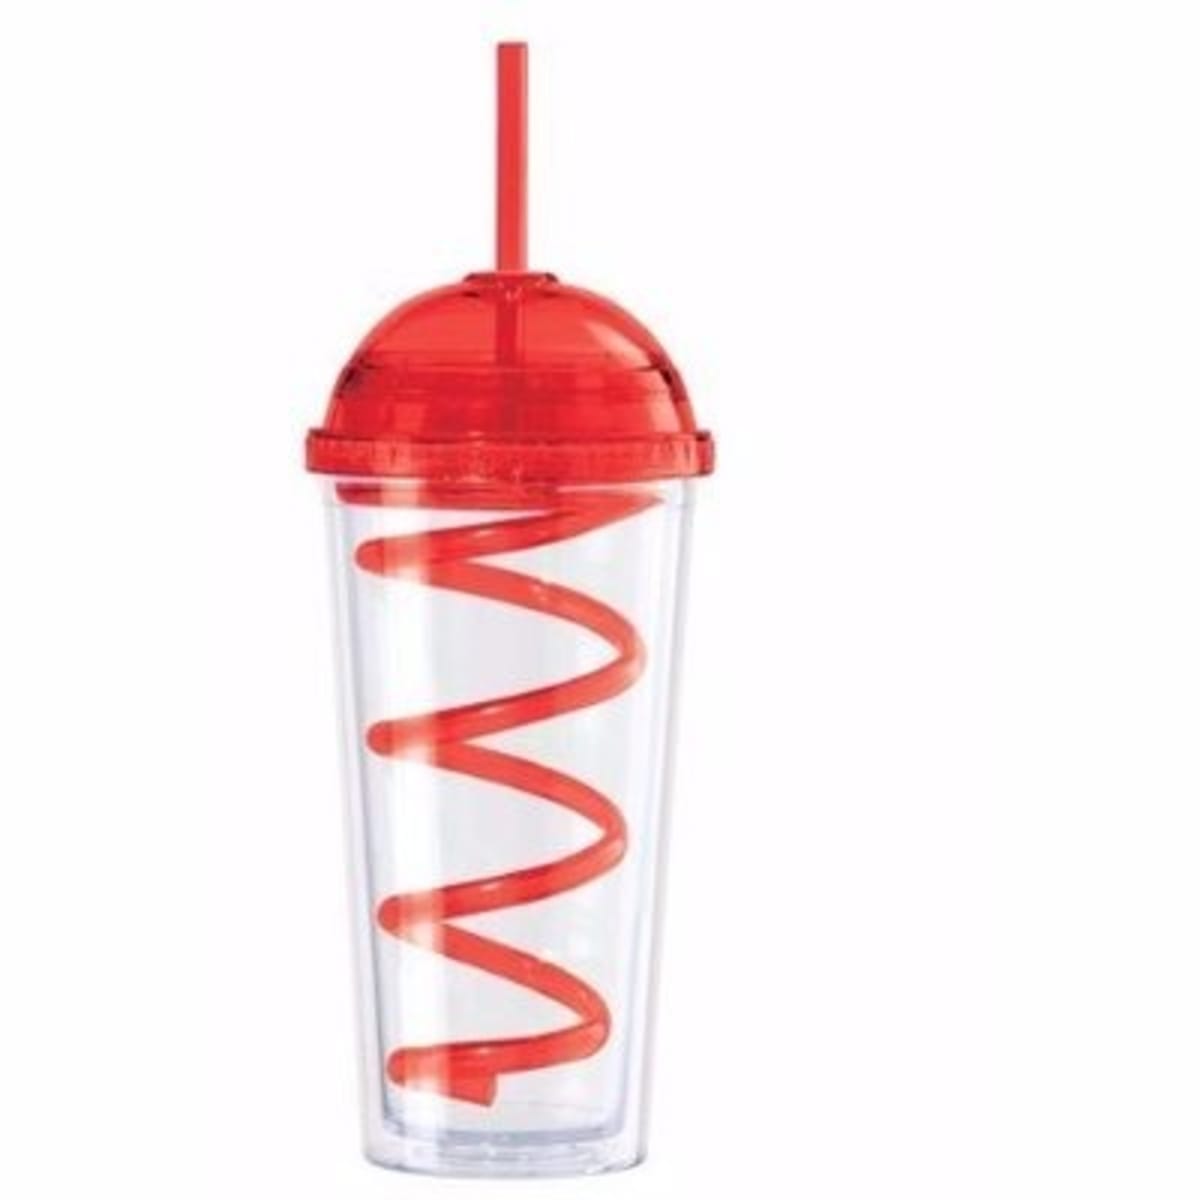 https://www-konga-com-res.cloudinary.com/w_400,f_auto,fl_lossy,dpr_3.0,q_auto/media/catalog/product/A/c/Acrylic-Smoothie-Cup-with-Spiral-Straw---Red-7228323.jpg